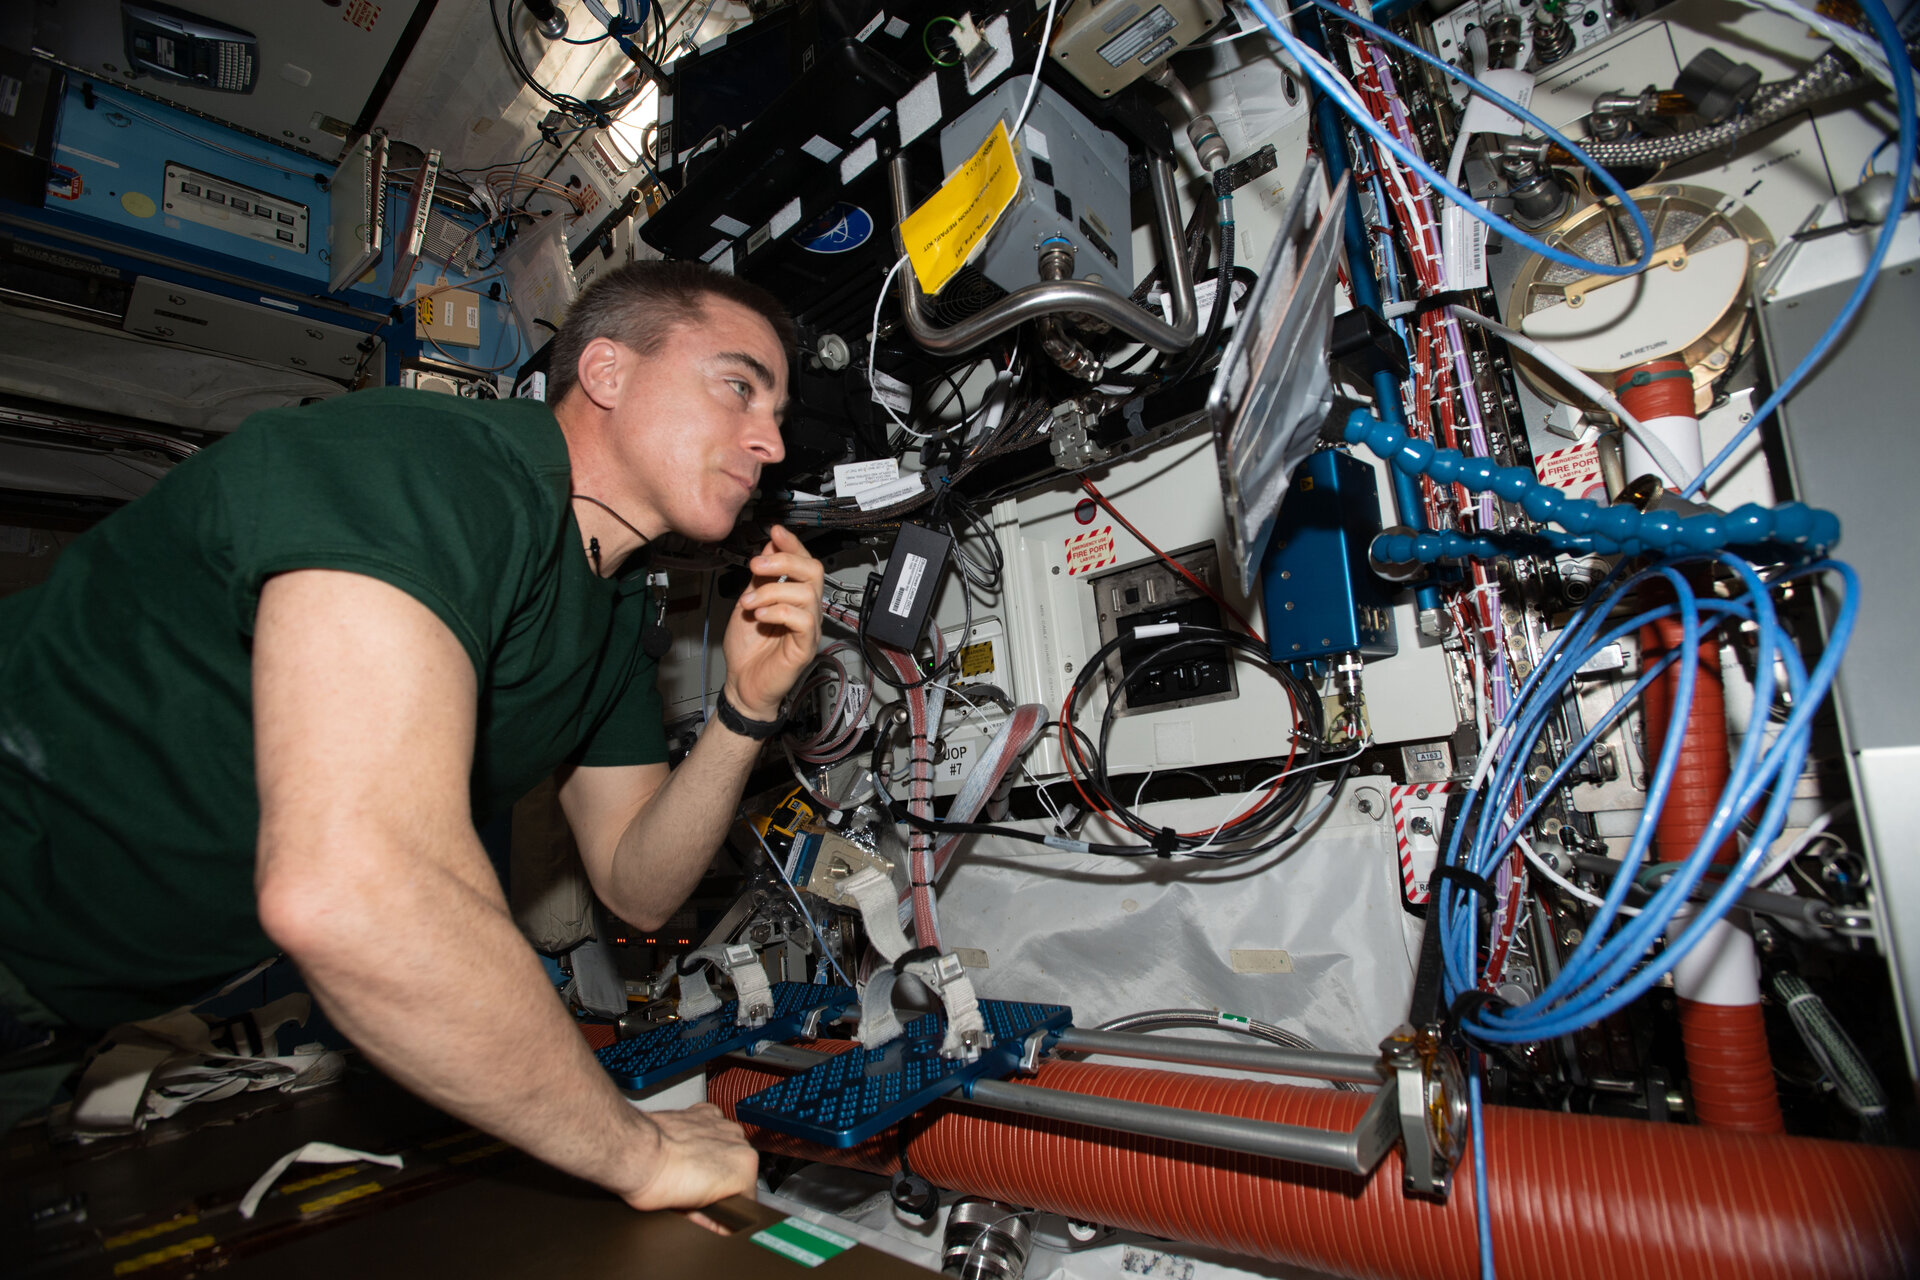 NASA astronaut and Expedition 63 Commander Chris Cassidy swaps a hard disk drive during computer maintenance on the robotics work station which controls and commands the Canadarm2 robotic arm.